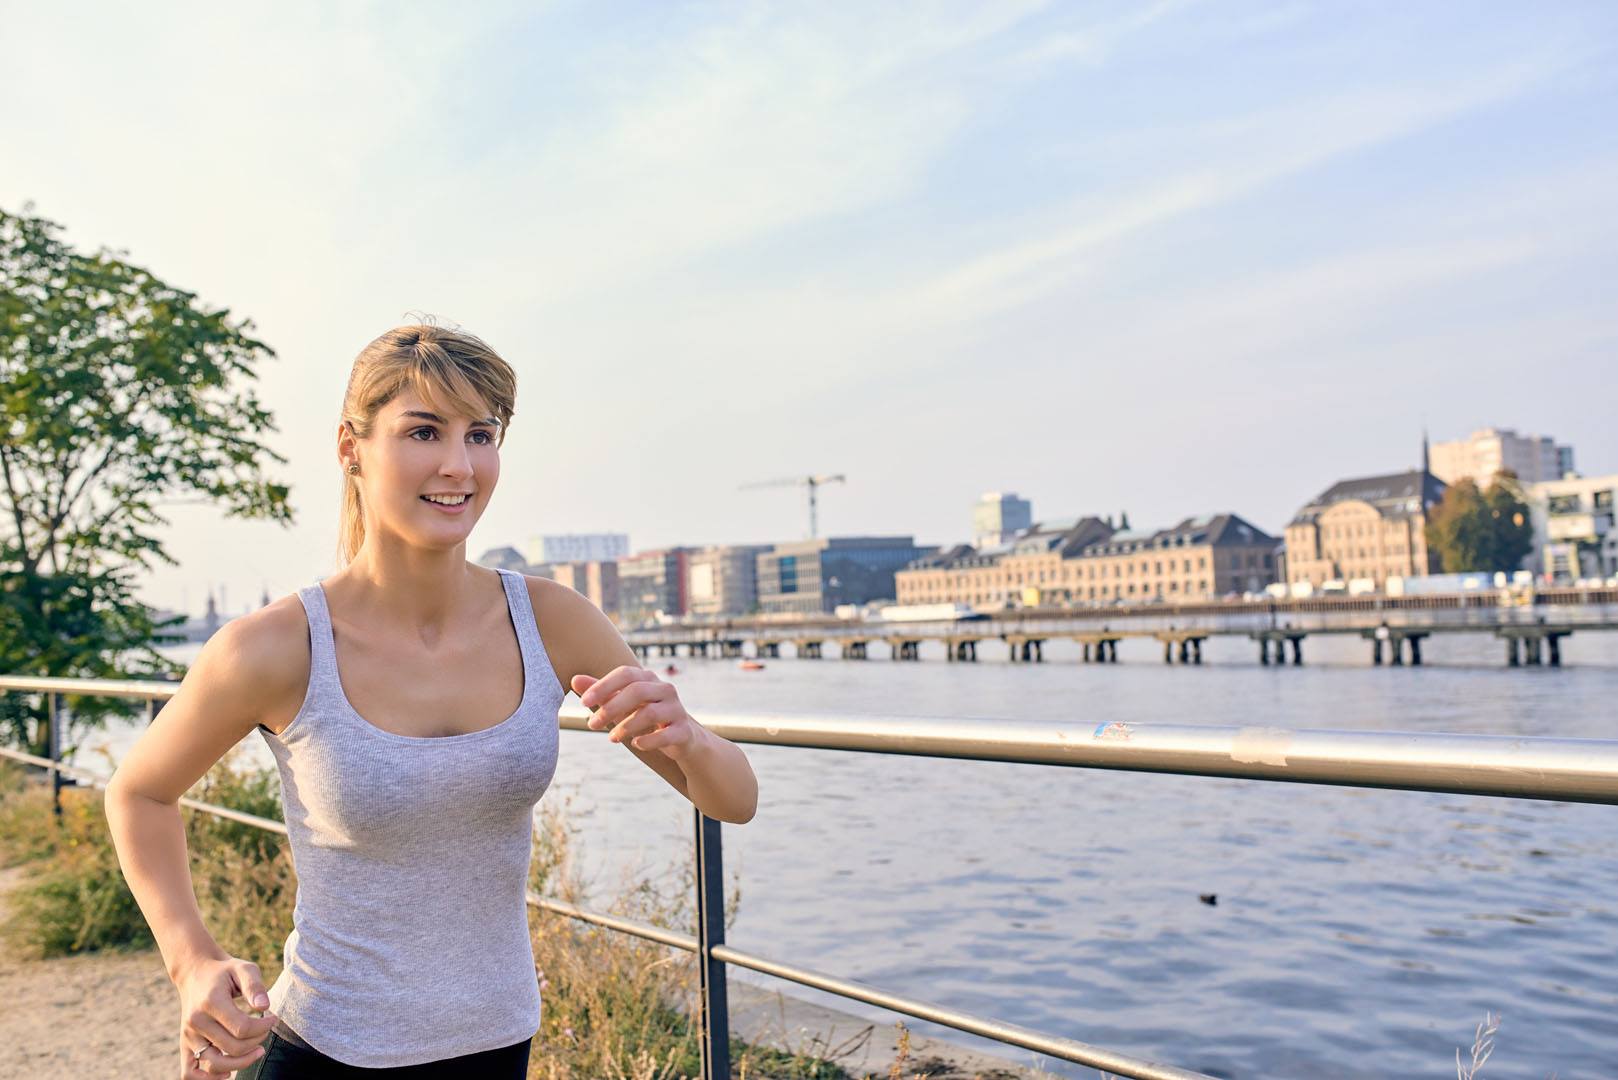 Sport & Lifestyle Editorial: Running along the Spree